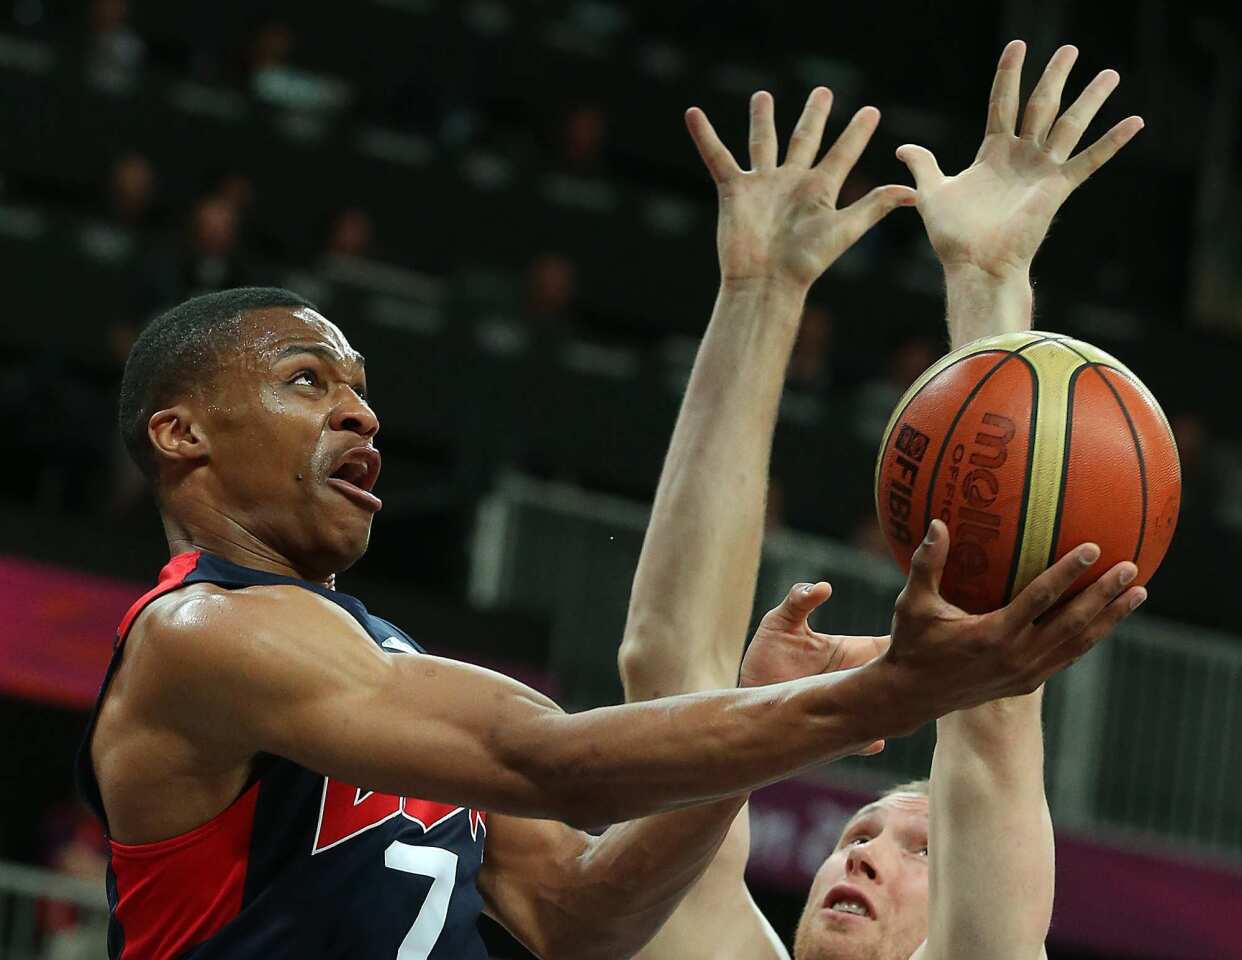 Team USA's Russell Westbrook attempts a reverse layup in the first half against Lithuania in a men's basketball game at the Olympics.